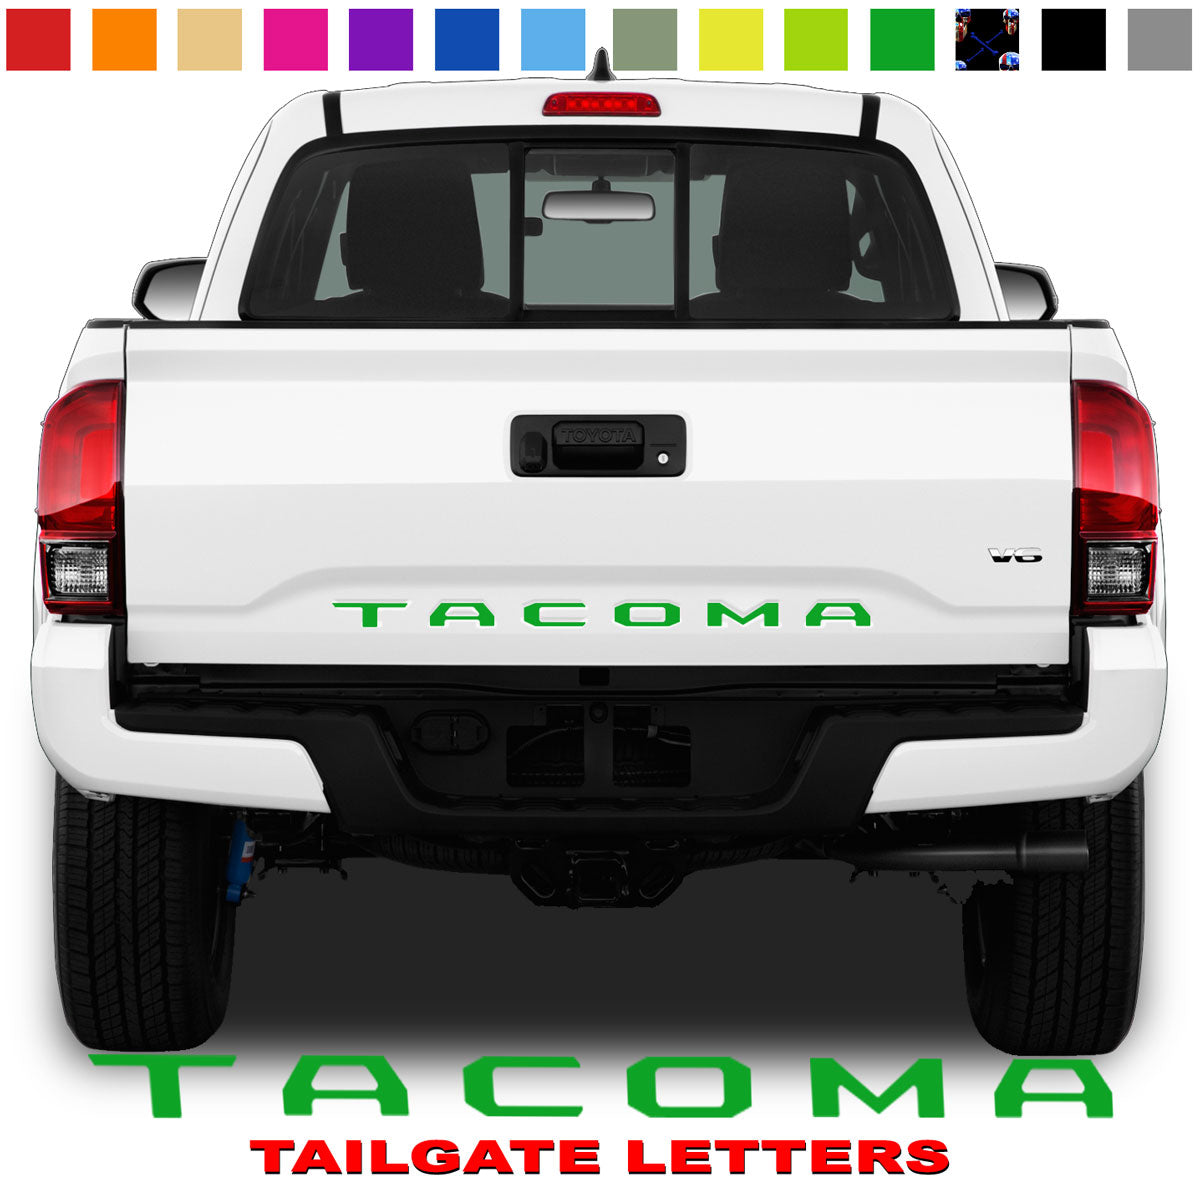 Toyota Tacoma Tailgate Lettering Green